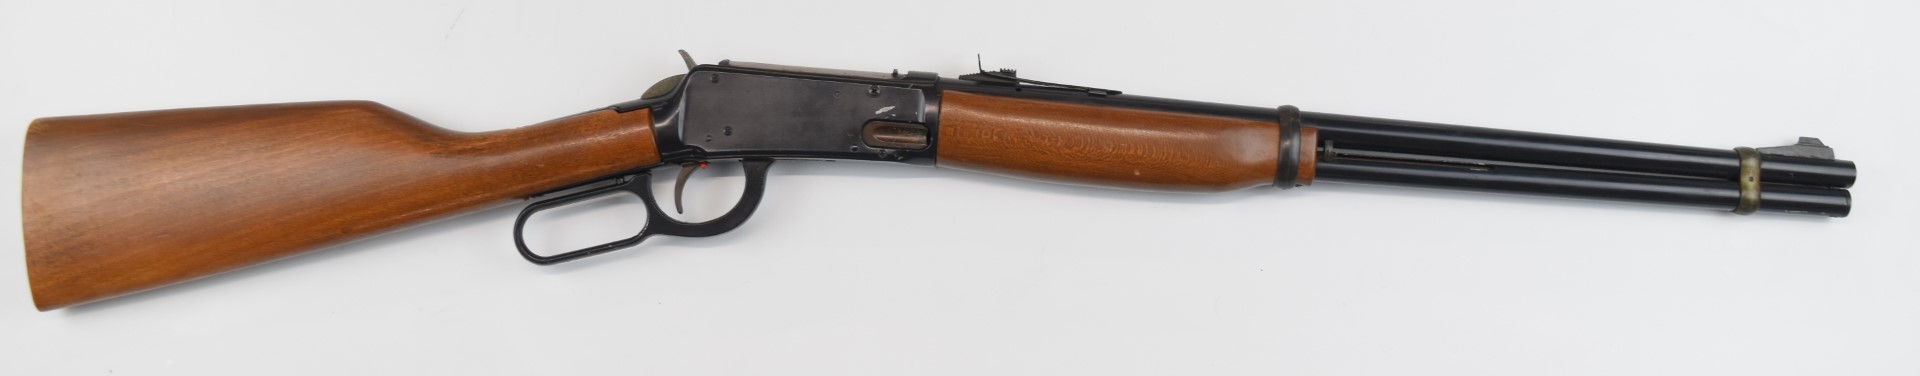 Daisy Model 1894 40 Shot Repeater .177 Winchester style under-lever air rifle with adjustable sights - Image 3 of 16